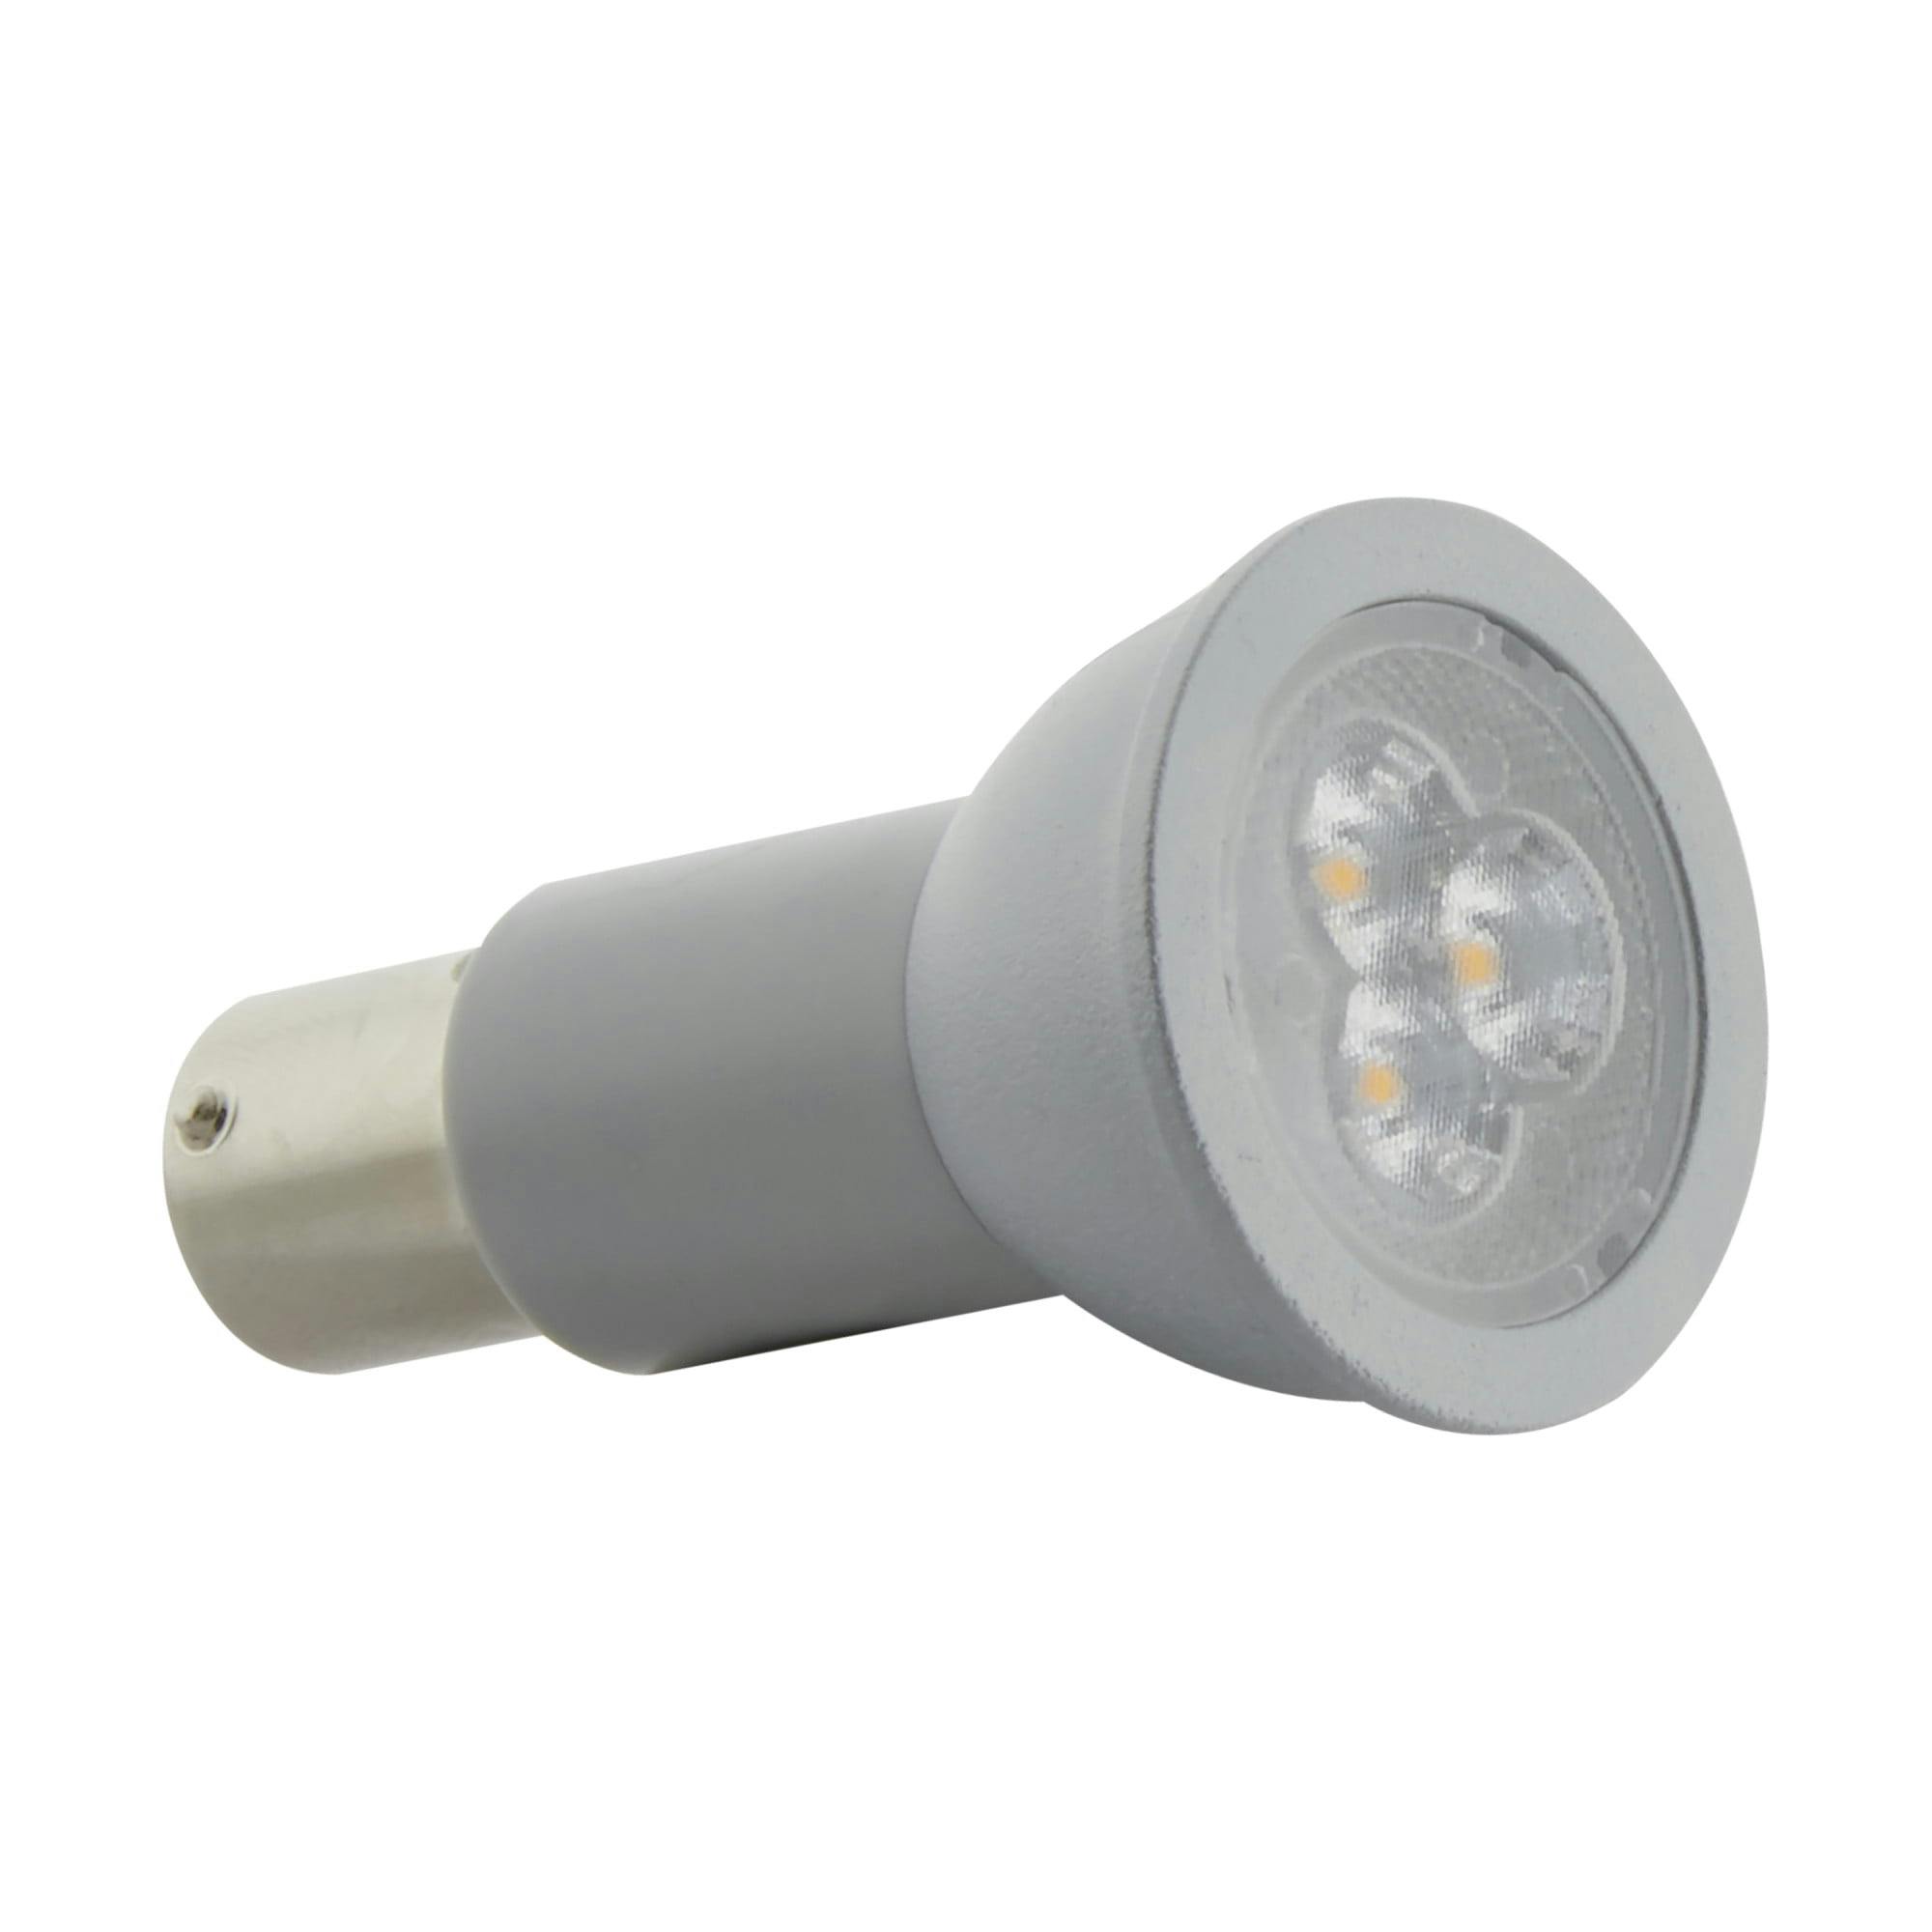 Bayonet 3W R12 LED Bulb for Elevators and Displays - Silver